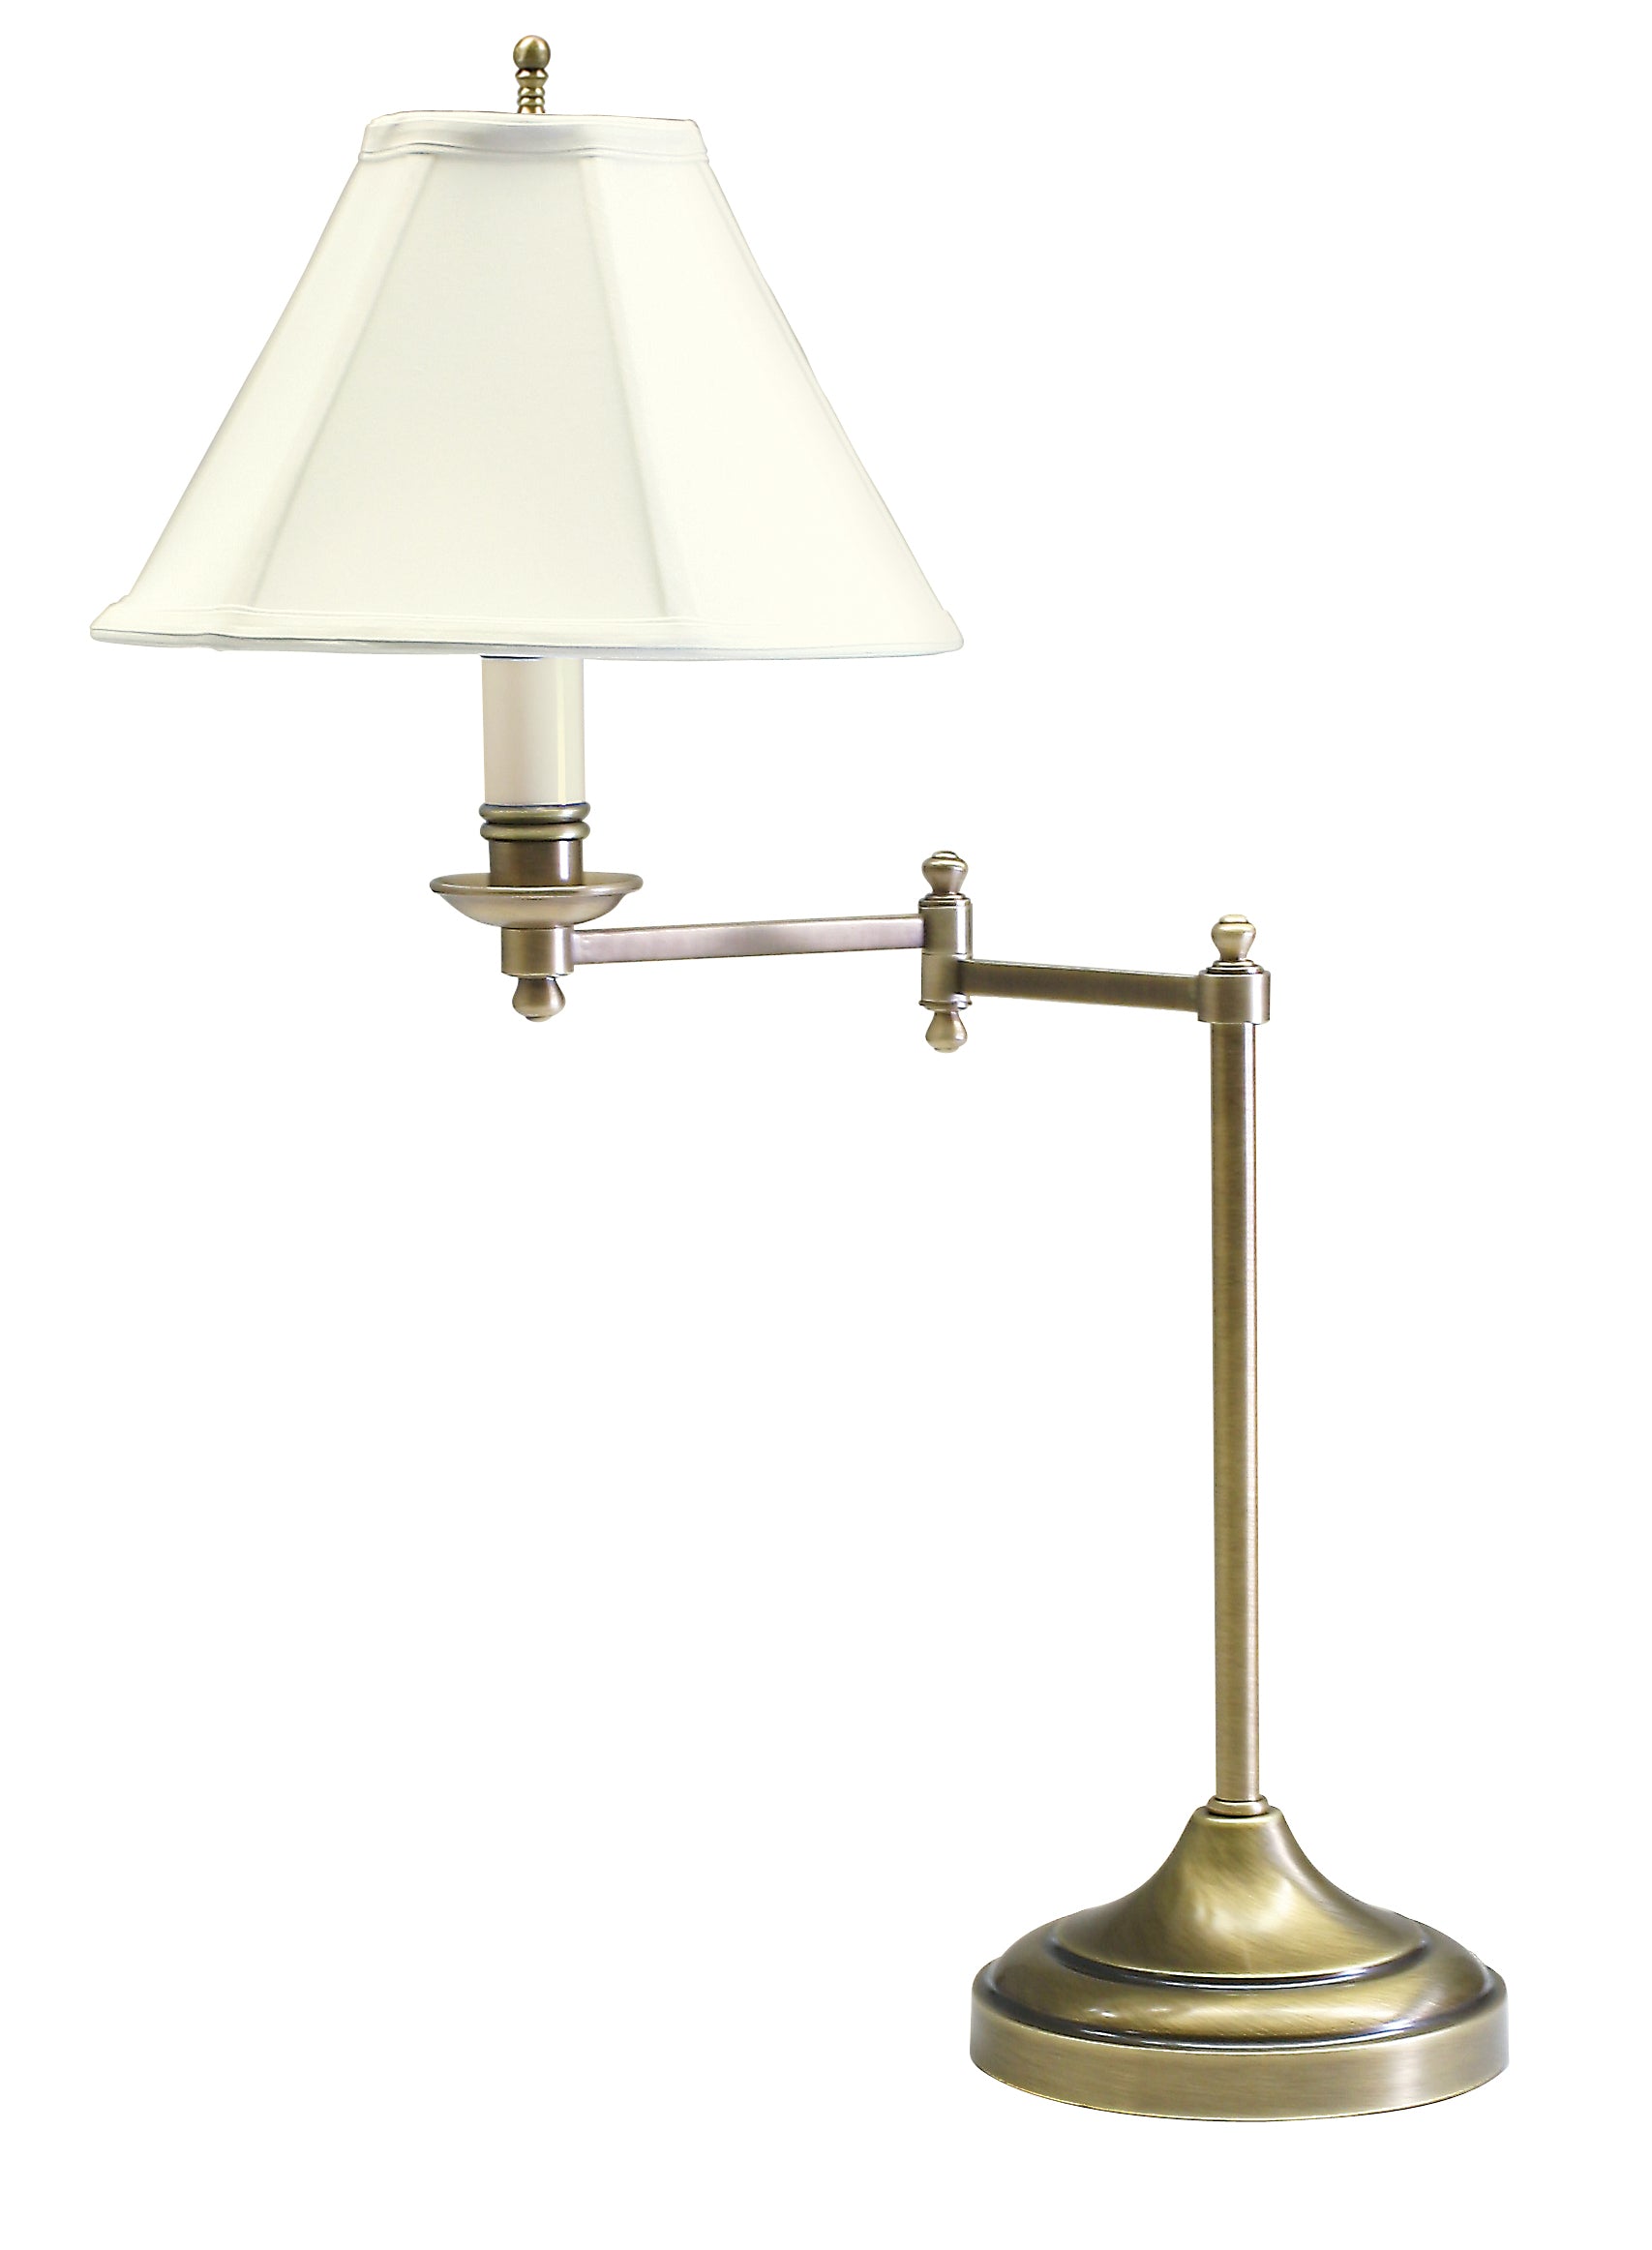 House of Troy Club 25" Antique Brass Table Lamp with swing arm CL251-AB